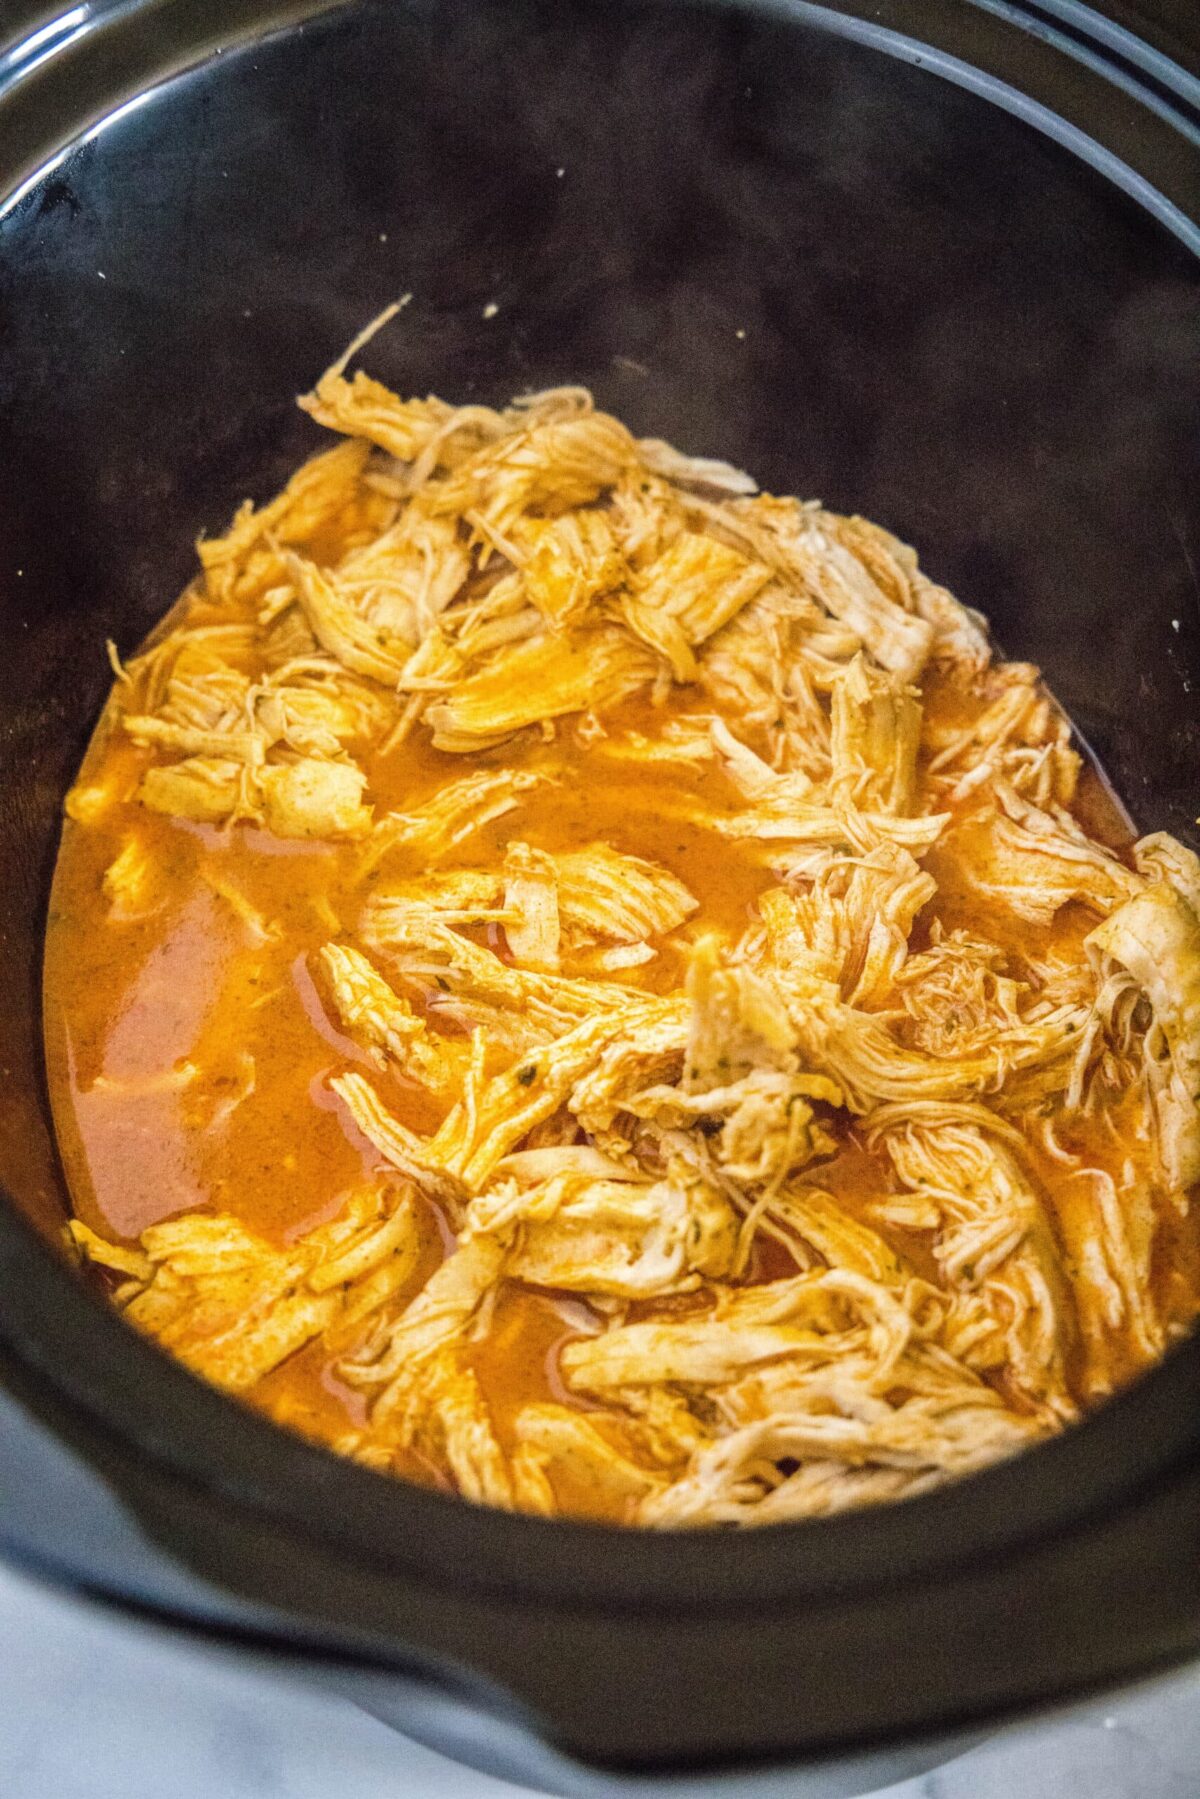 Shredded chicken in a slow cooker with a buffalo sauce